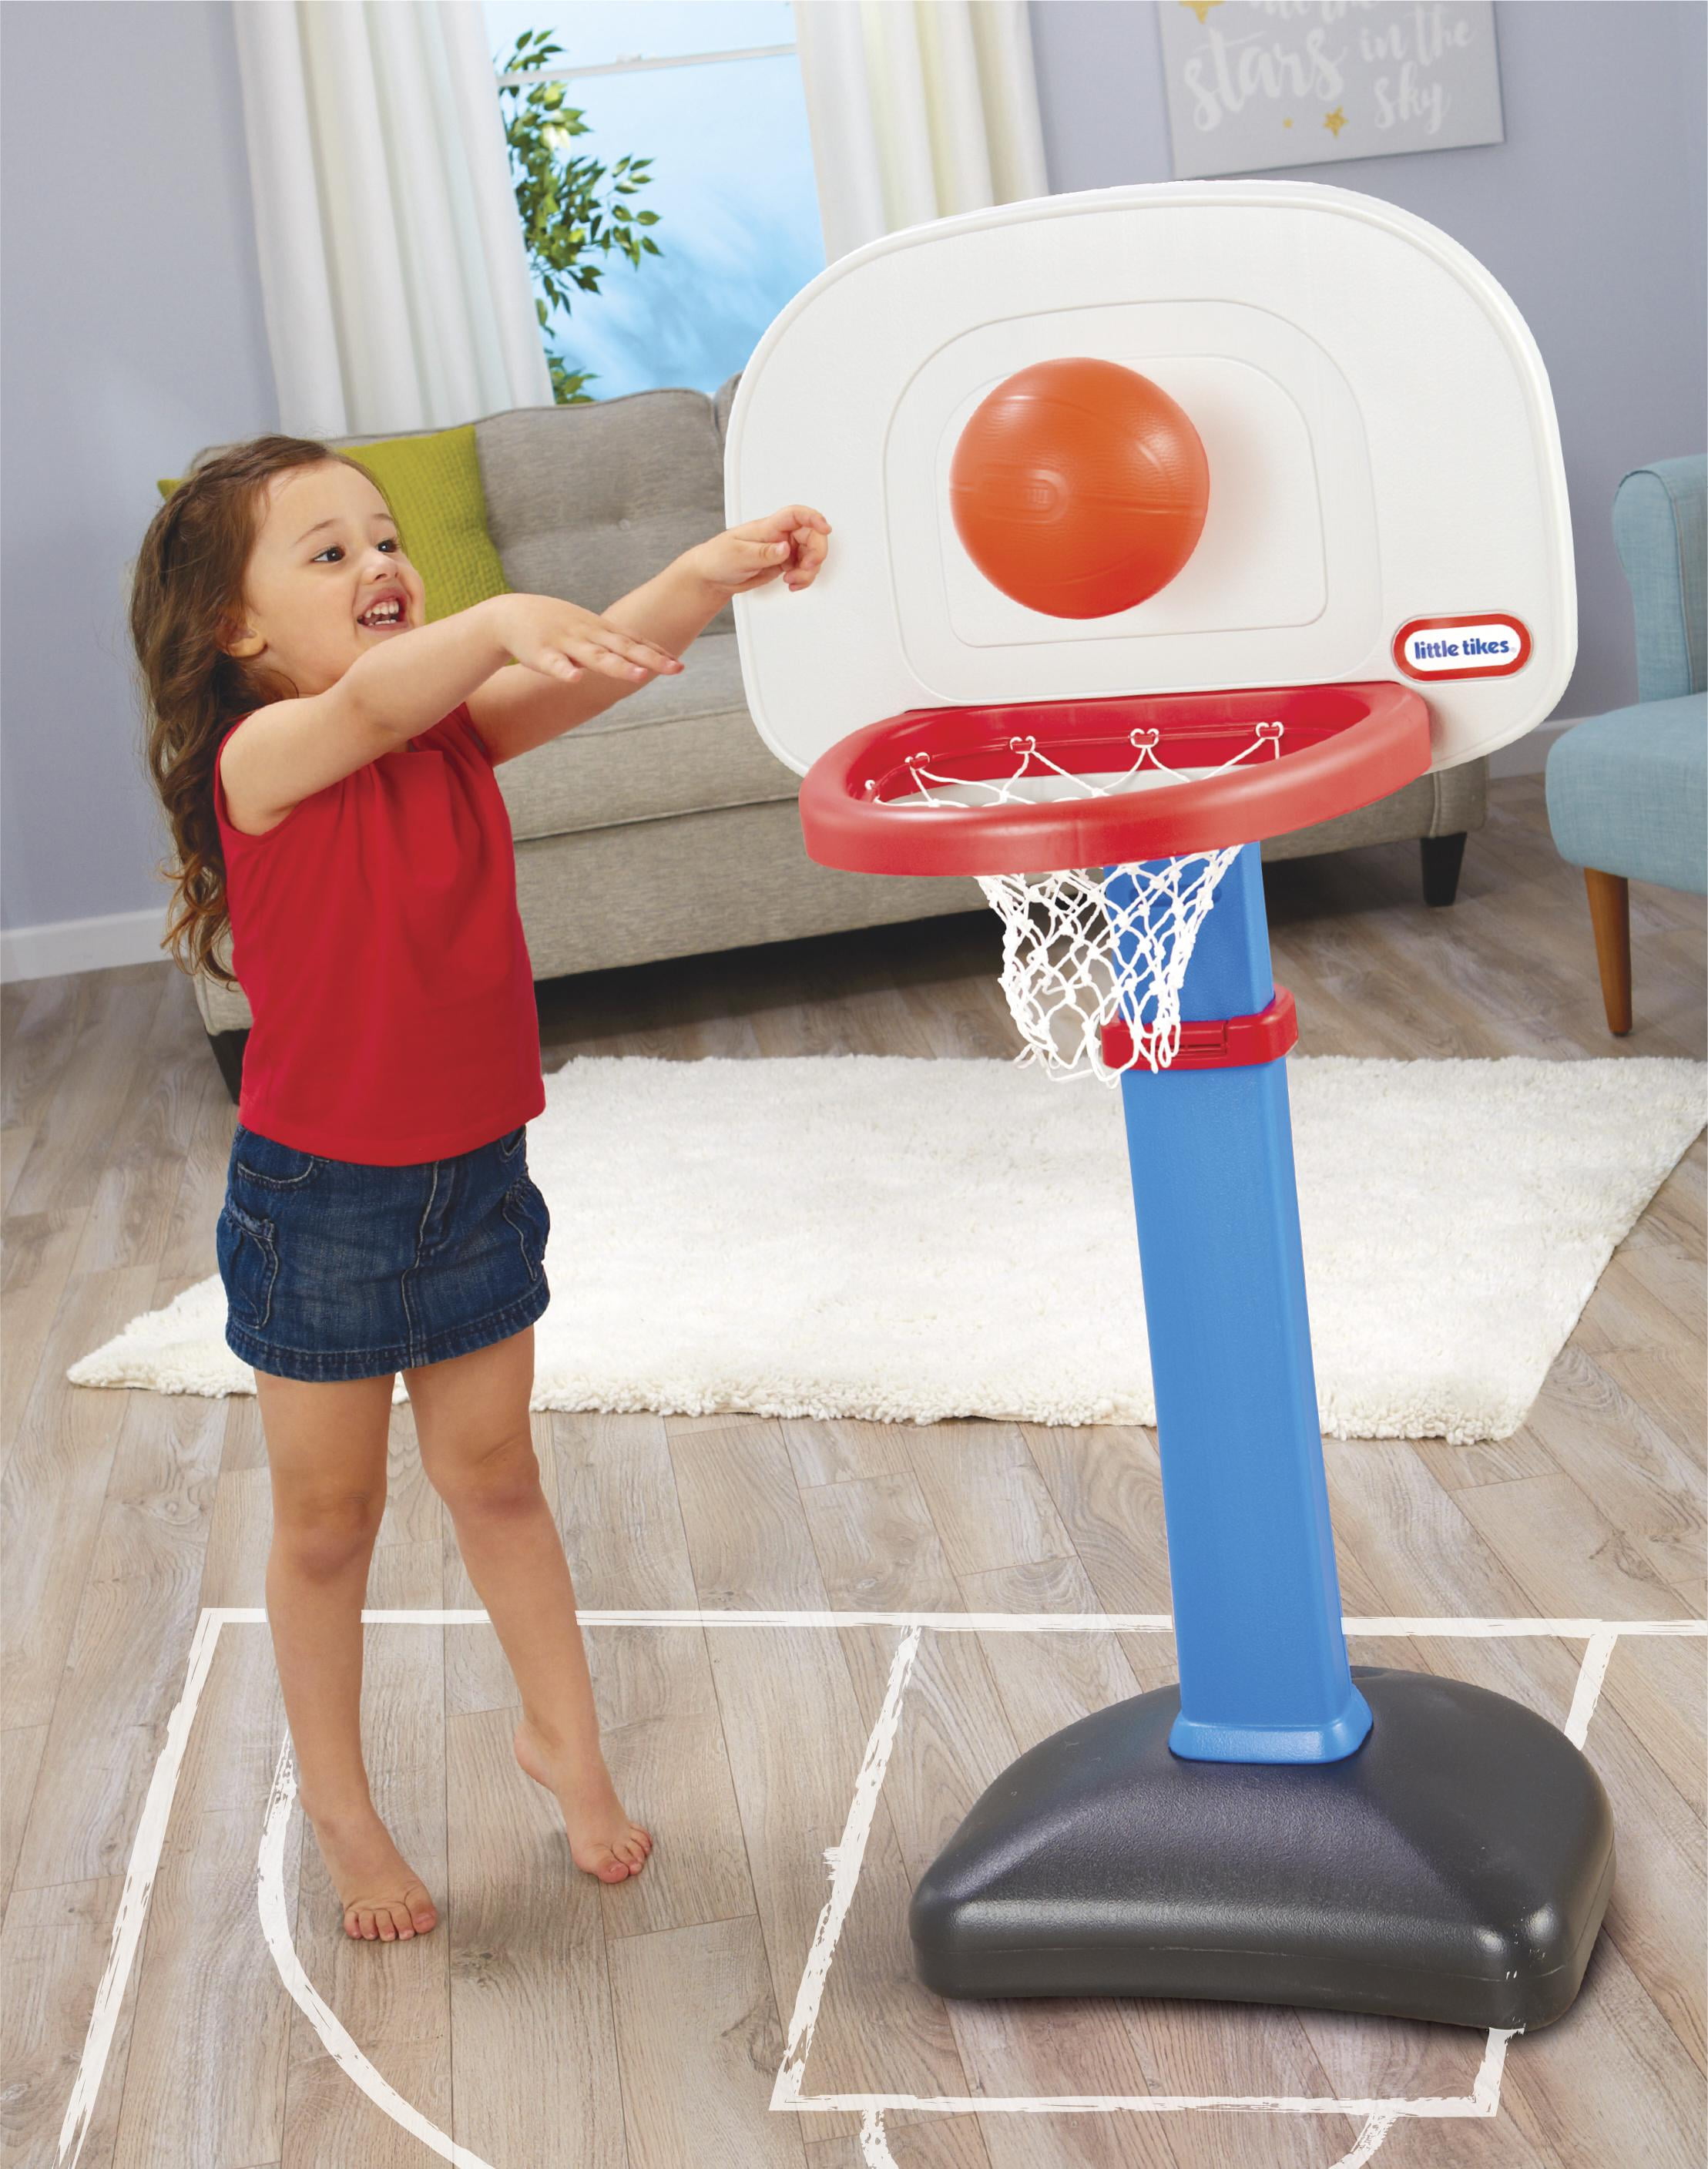 Little Tikes TotSports Easy Score Toy Basketball Hoop with Ball, Height Adjustable, Indoor Outdoor Backyard Toy Sports Play Set For Kids Girls Boys Ages 18 months to 5 Year Old, Blue - 1